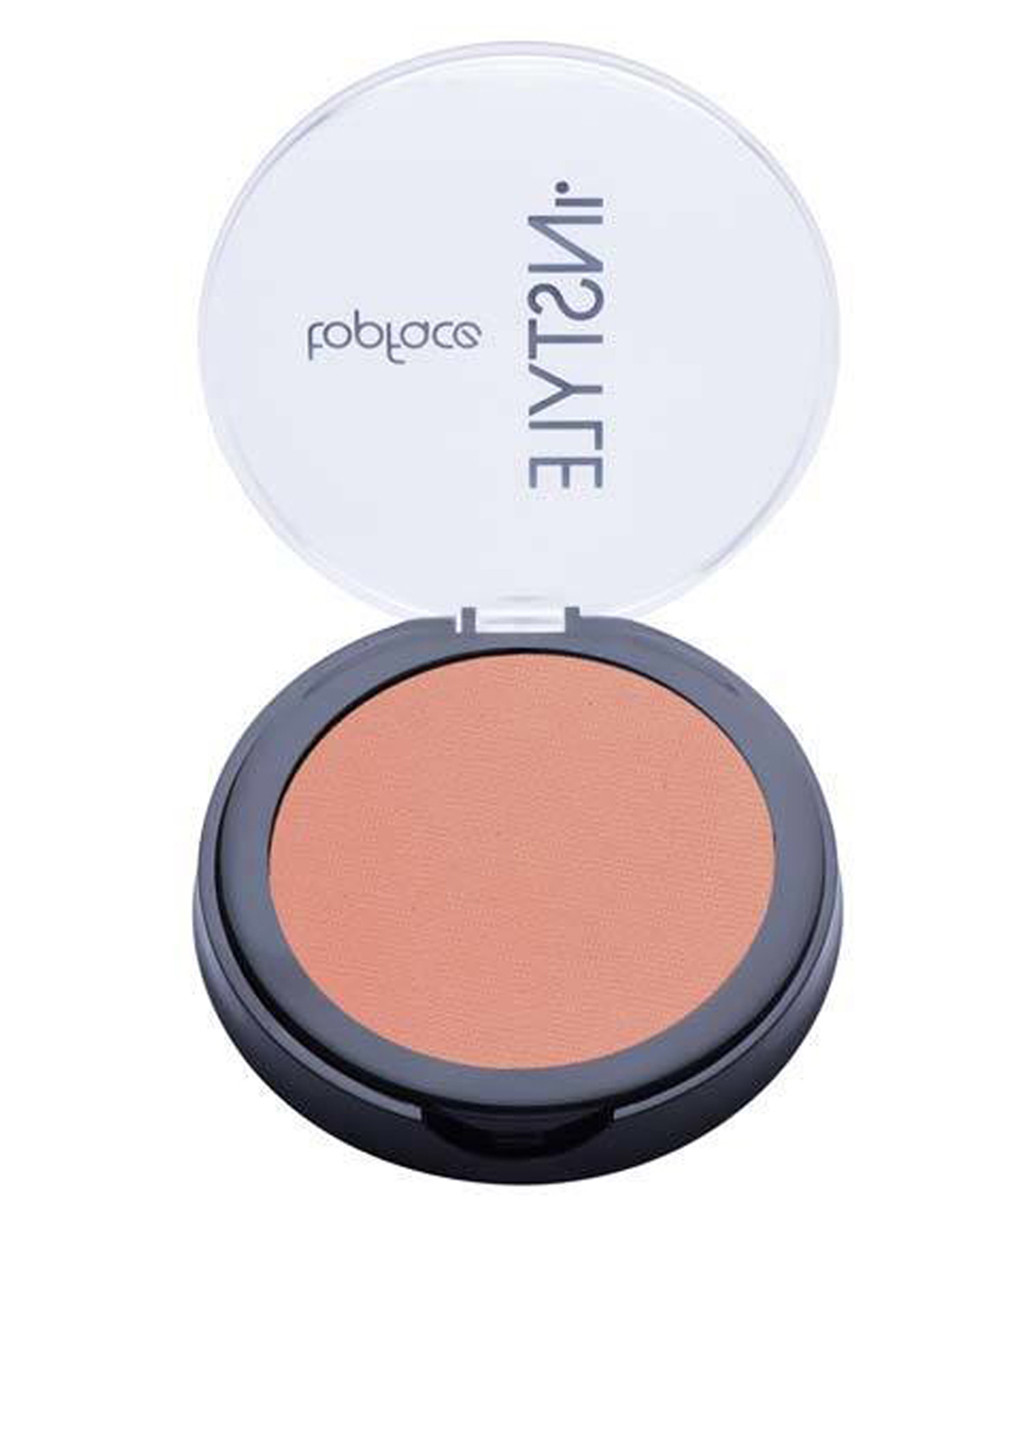 Румяна Instyle Blush On Compact PT354 № 002, 10 г TopFace (72753410)